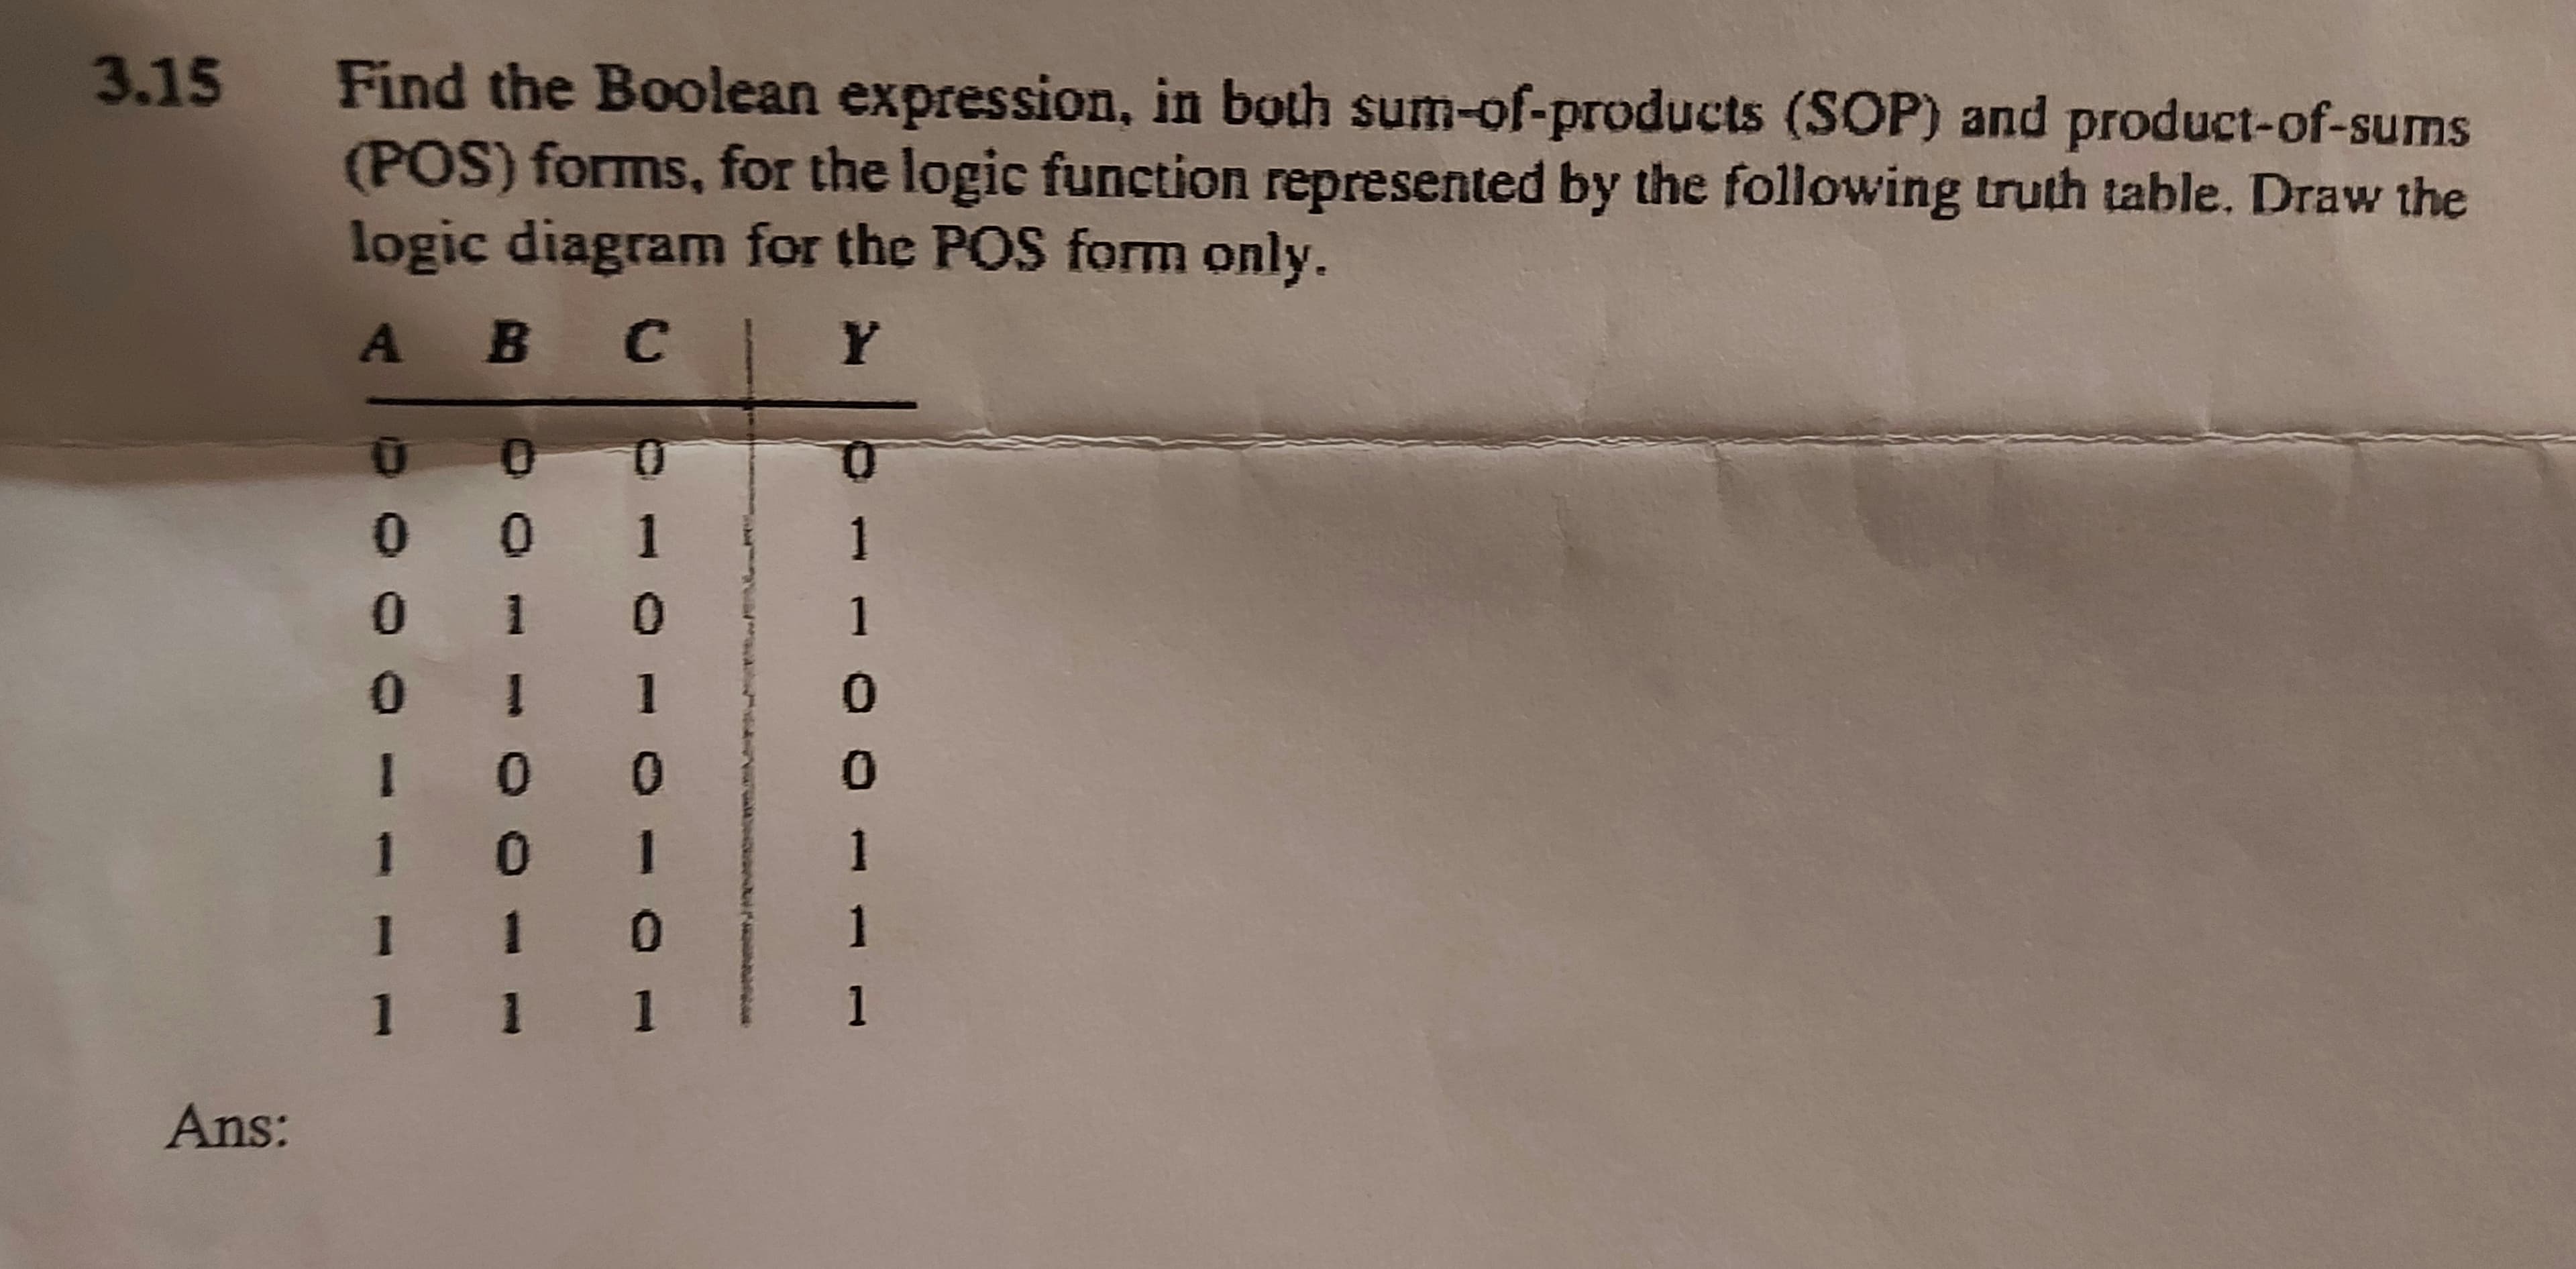 3.15
Find the Boolean expression, in both sum-of-products (SOP) and product-of-sums
(POS) forms, for the logic function represented by the following truth table. Draw the
logic diagram for the POS form only.
A B C
1
1
1
1
100
1 0
1 1
1
1
1
1
1 1
1
Ans:
